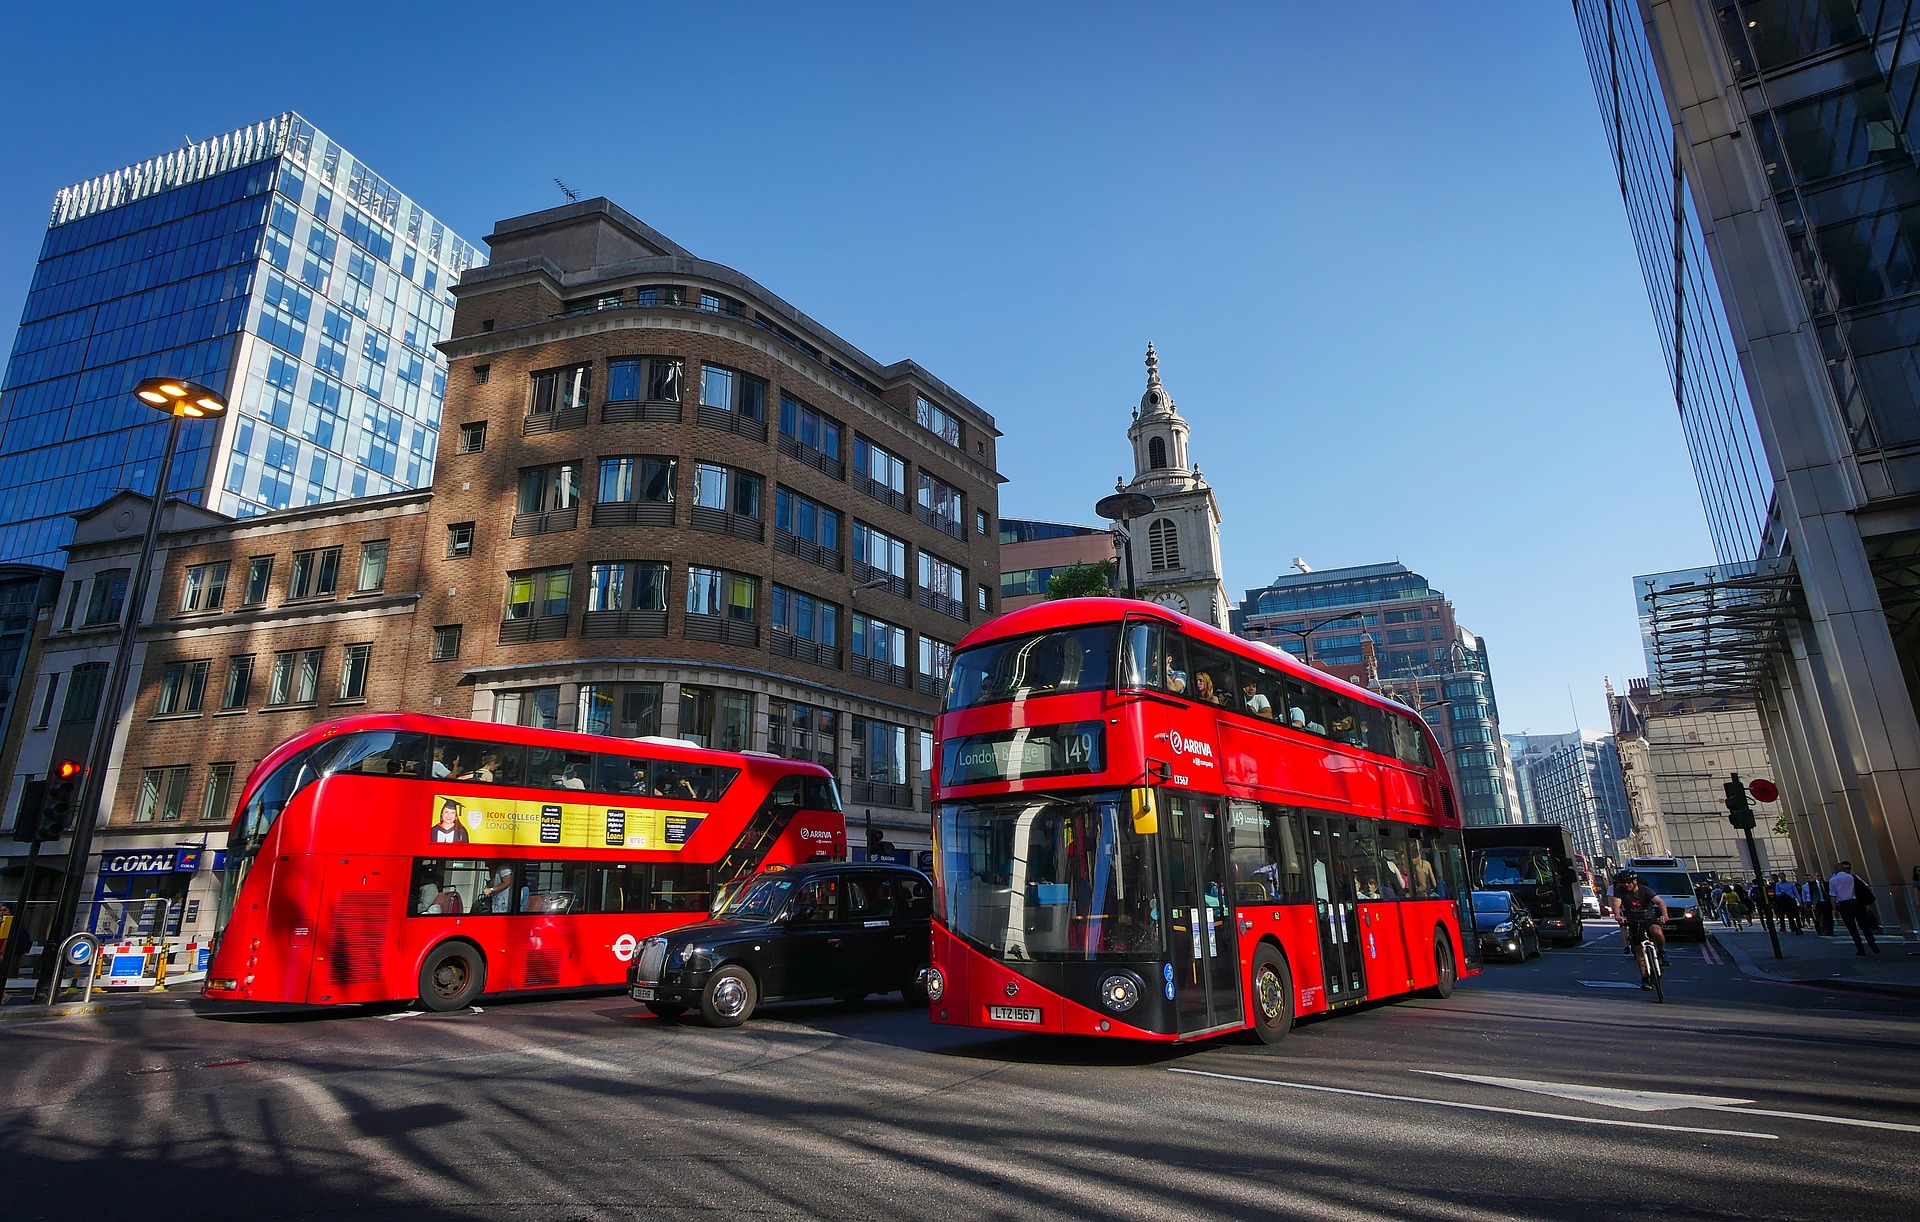 London Buses iconic sight